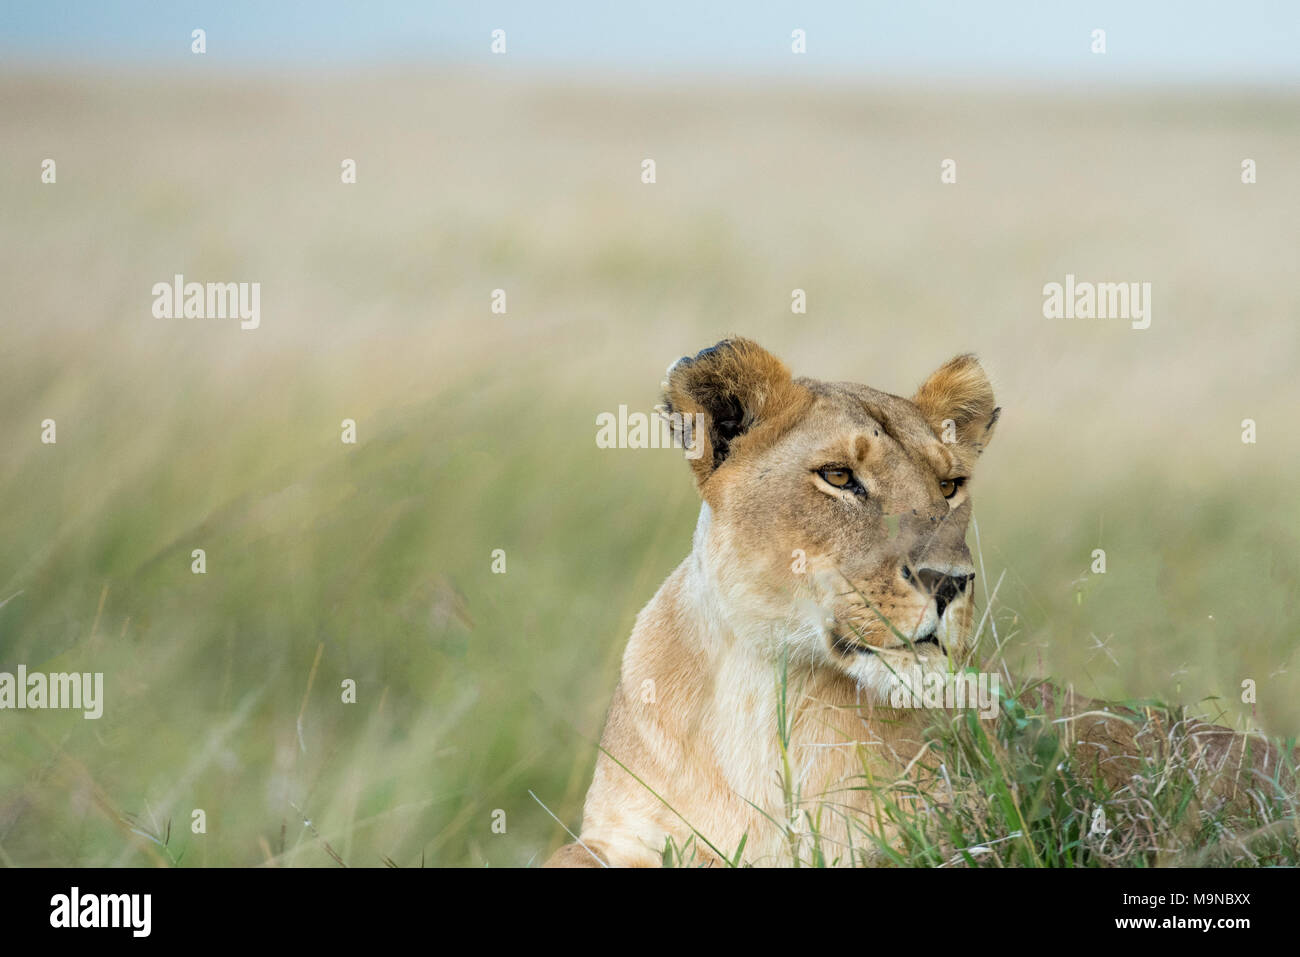 African Lioness in Savannah Stock Photo